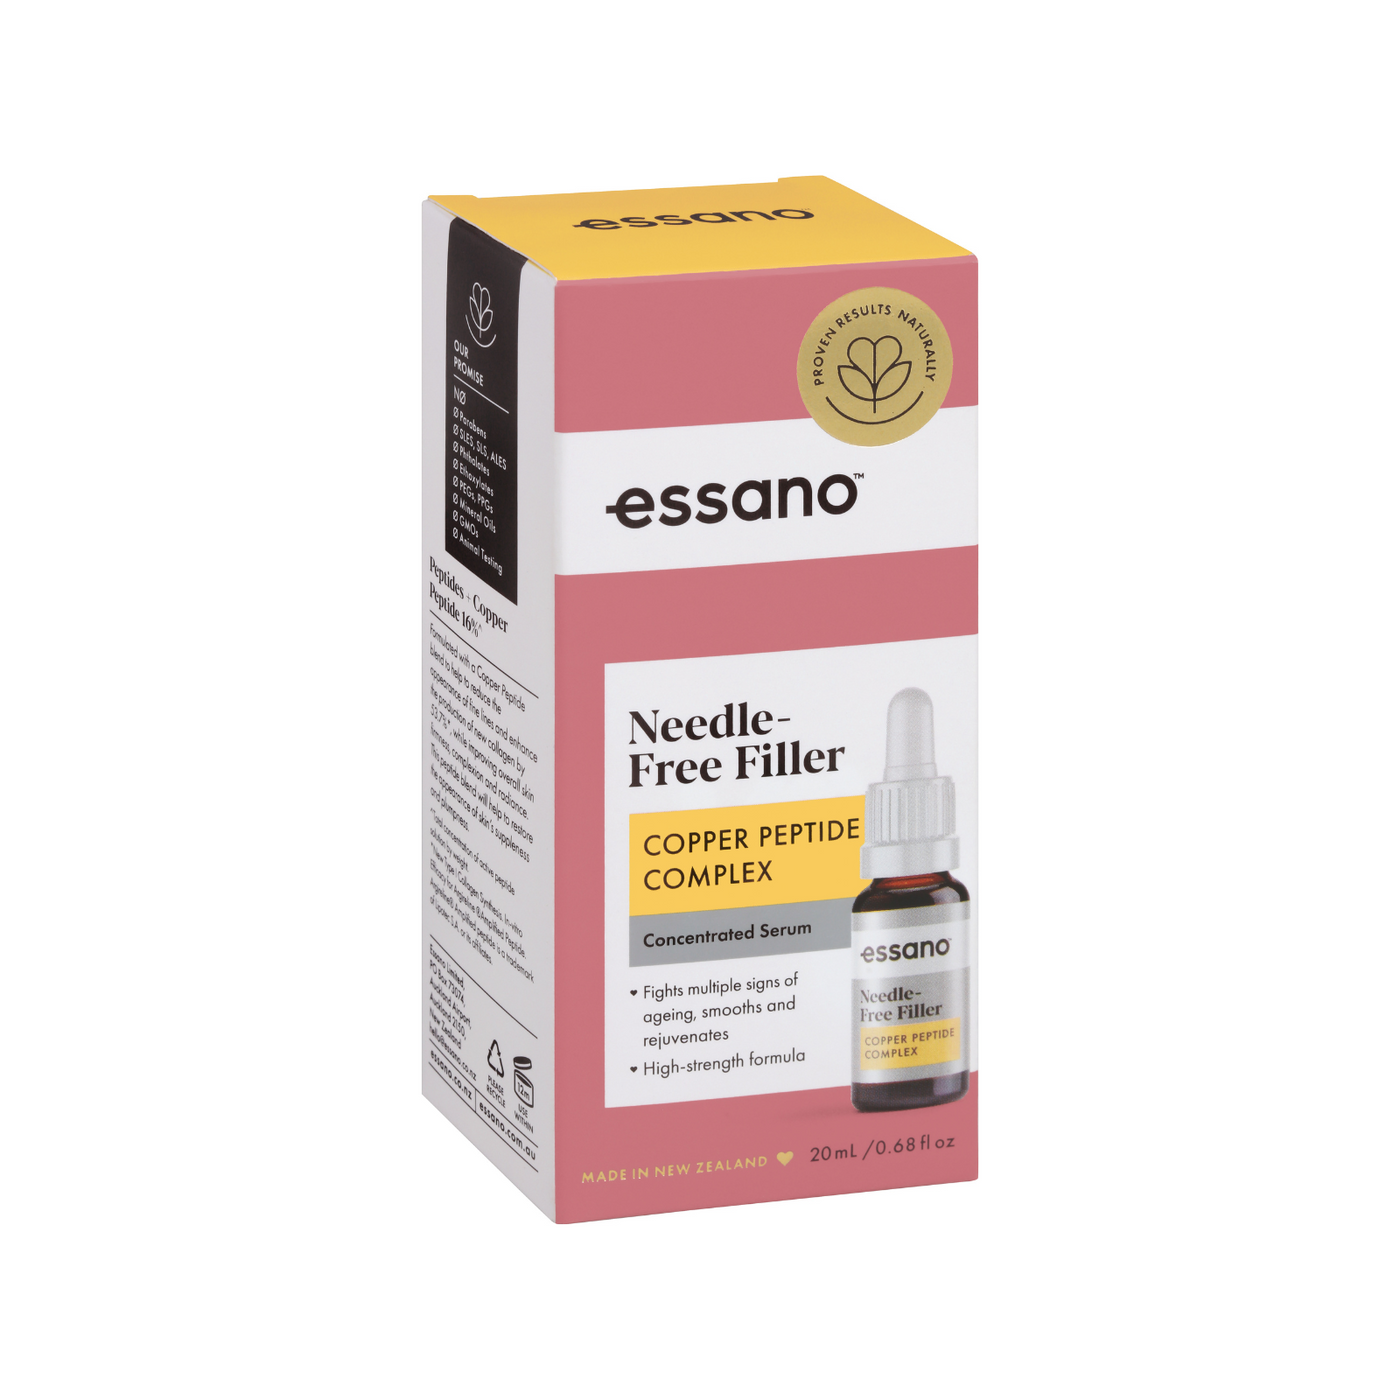 essano Needle-free Filler Concentrated Serum